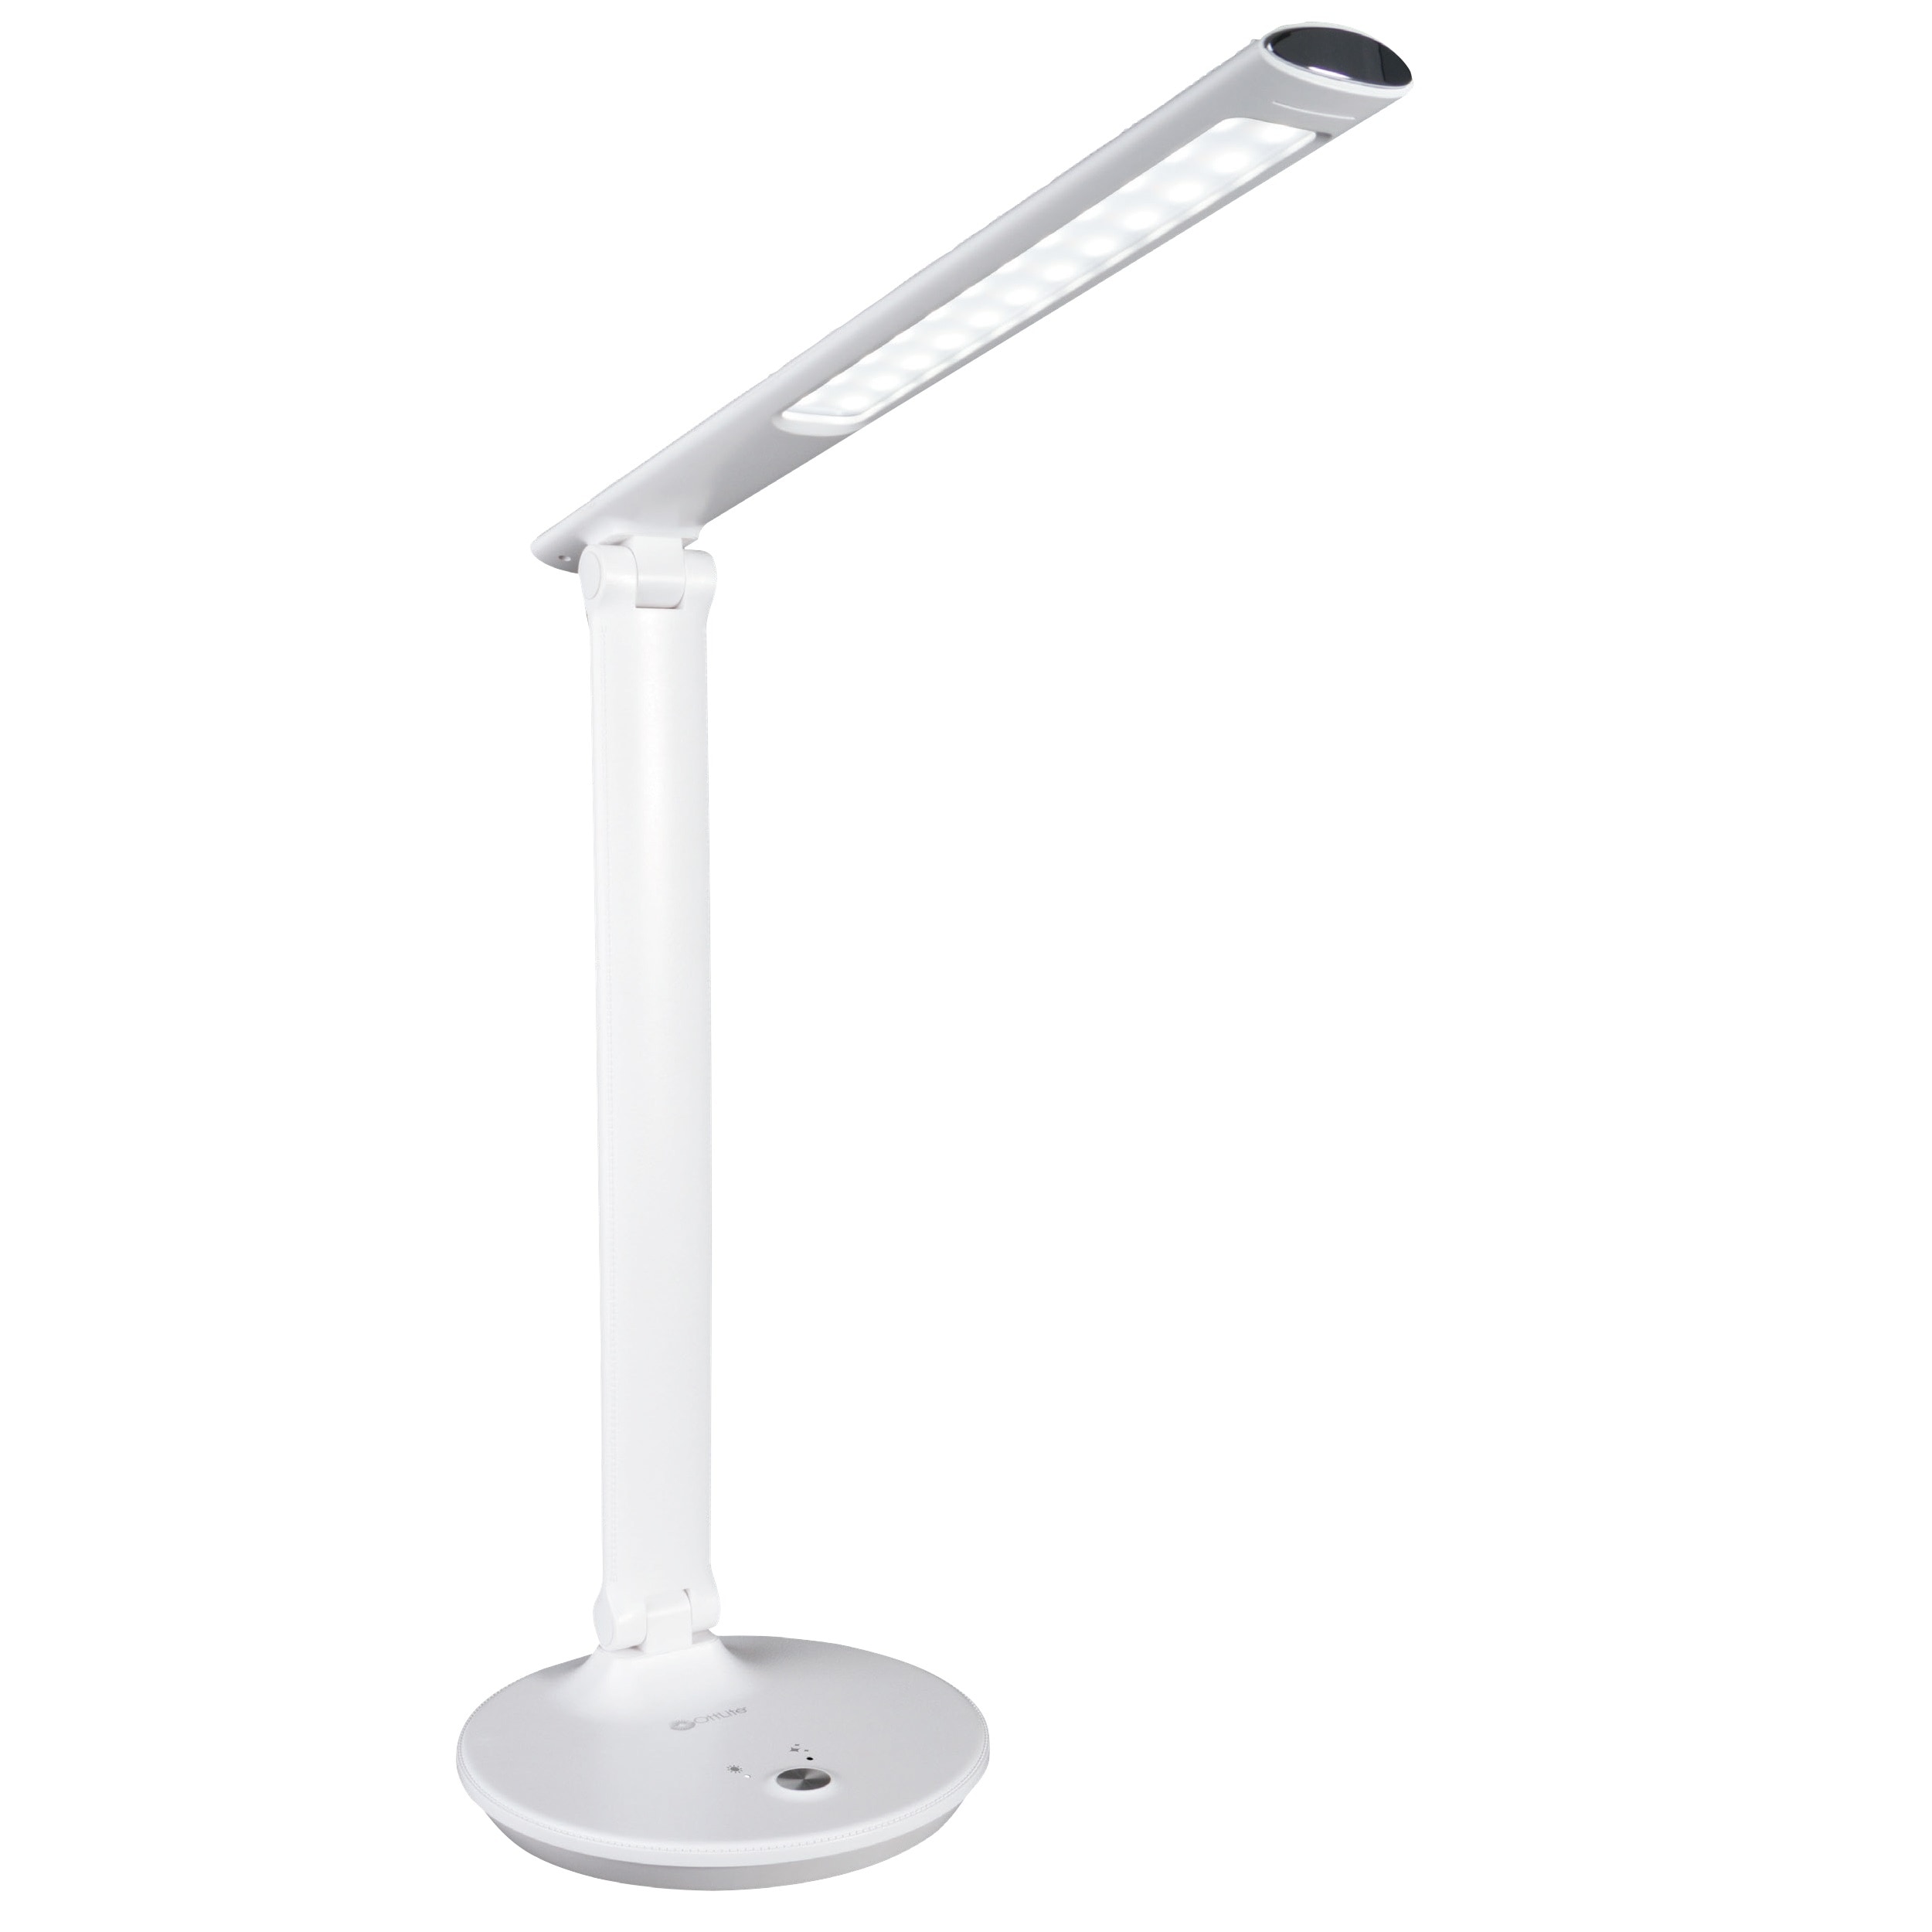 OttLite Command LED Desk Lamp with Voice Assistant - The Office Point